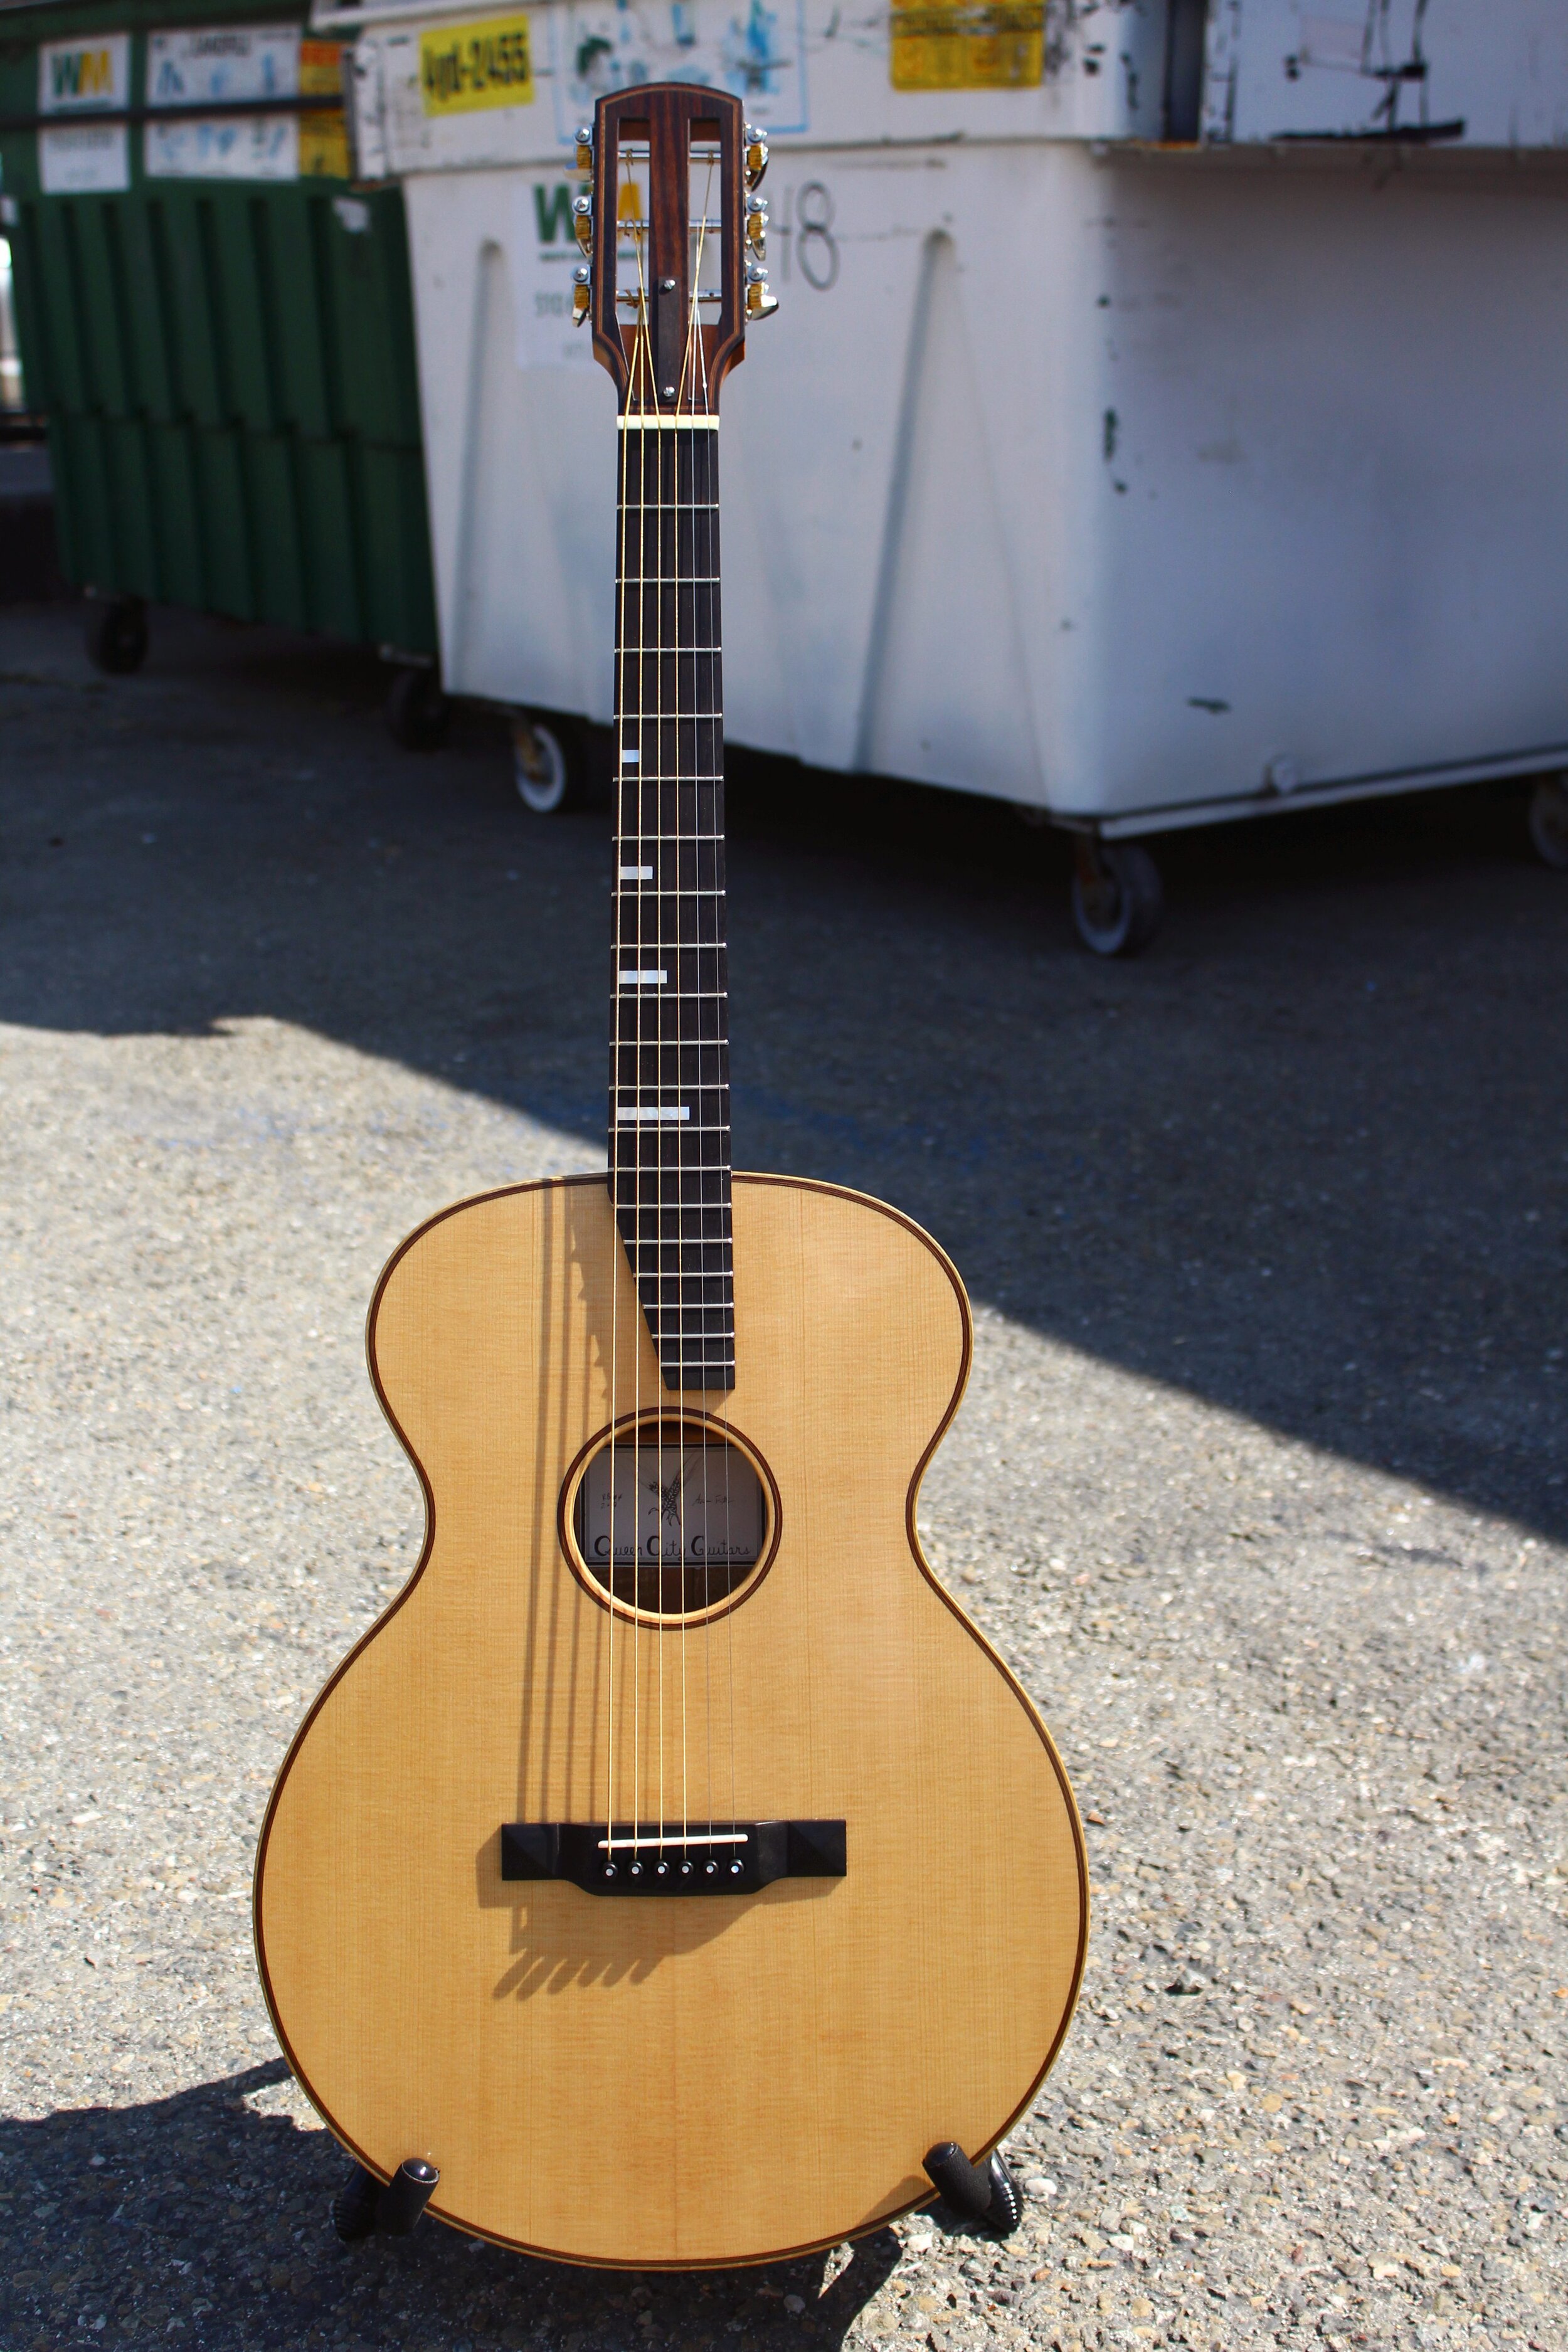 rb-00-handcrafted-acoustic-guitar